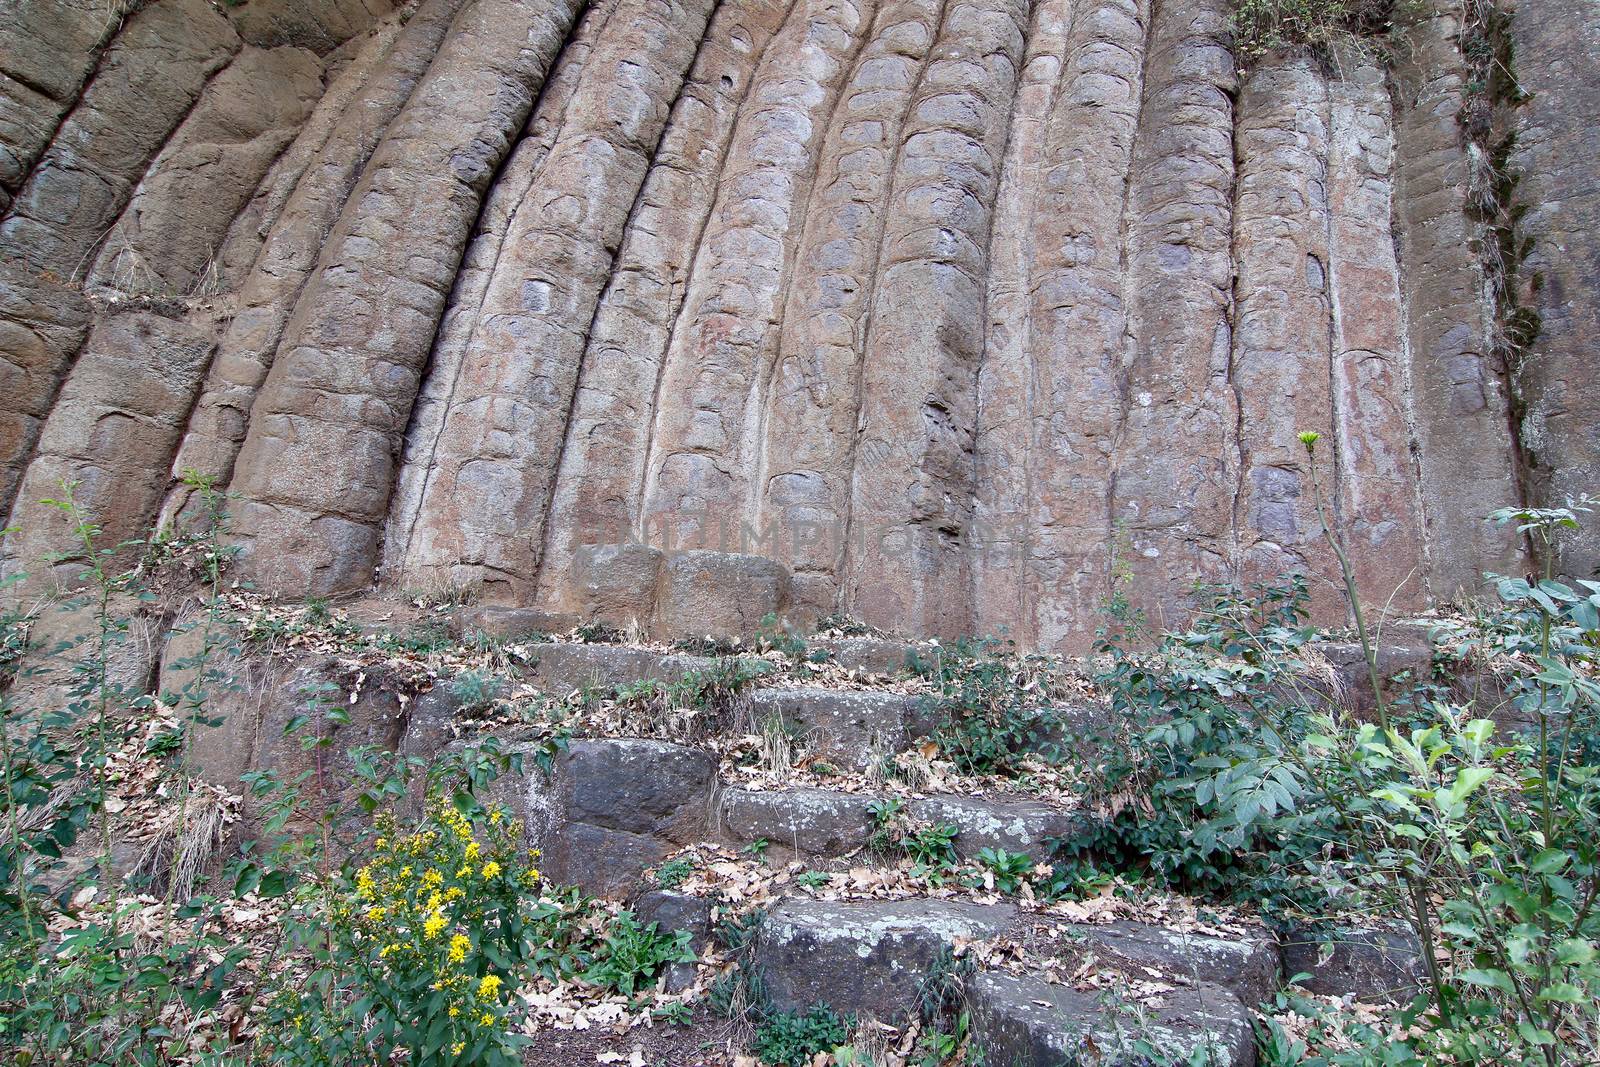 Interesting geological formation - Konojedy Rock Loaves - massif of the remains of several lava flows - example of basalt columnar jointing, Konojedy, Czech republic